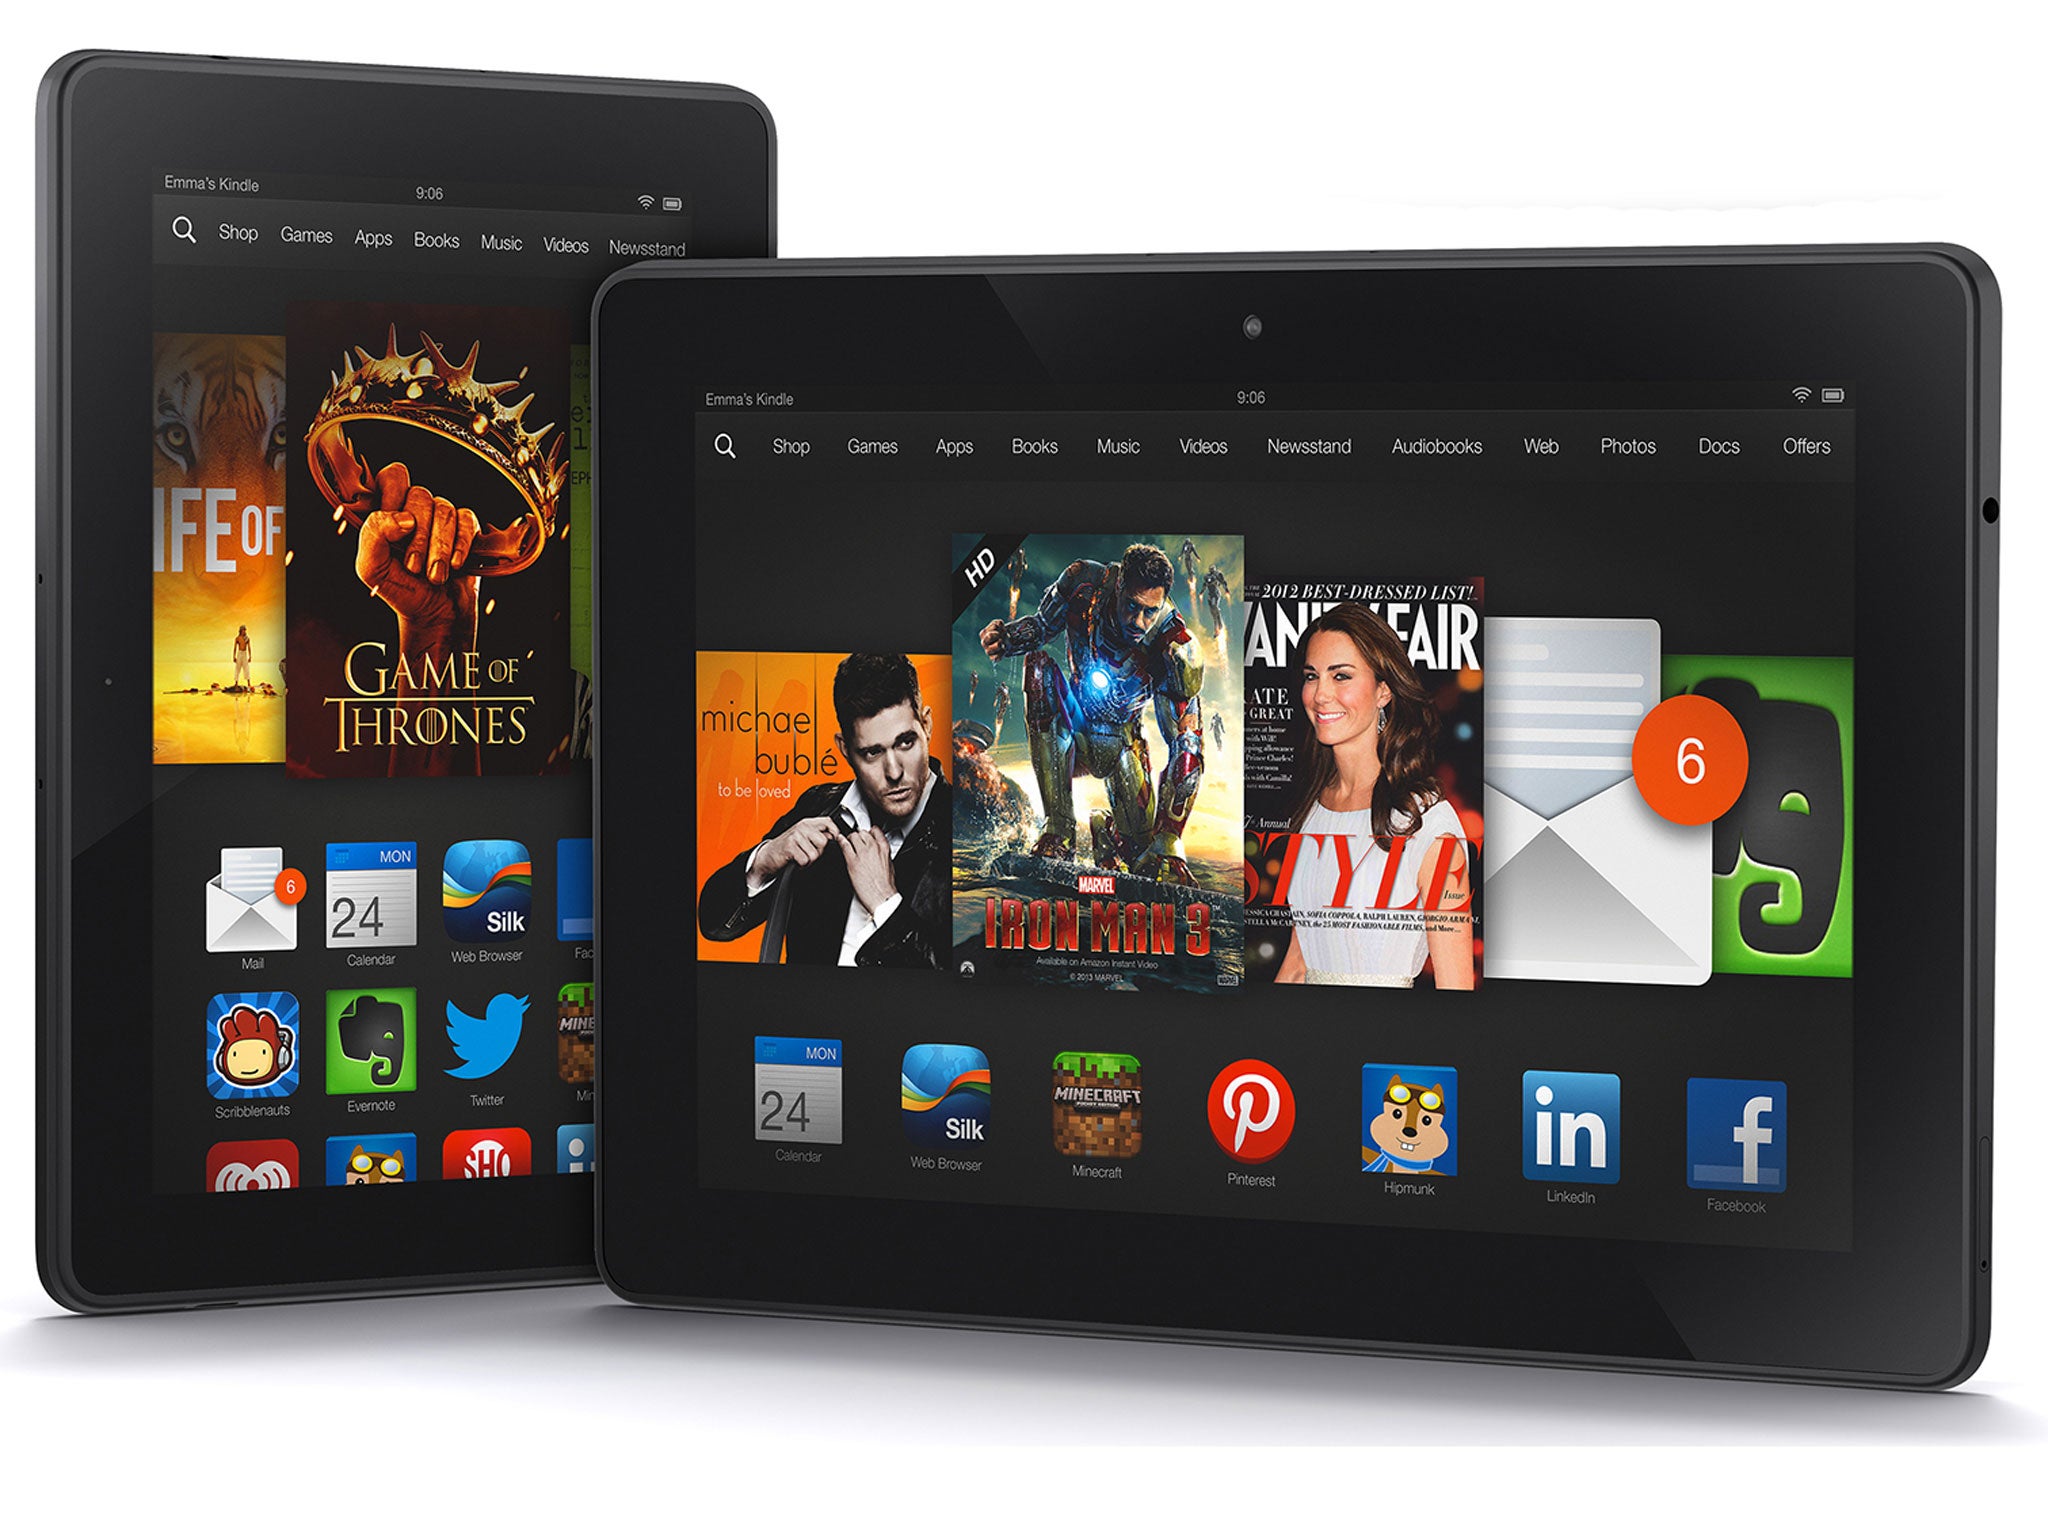 The Kindle Fire HDX comes in two sizes: 7-inch and 8.9-inch. It has a quad-core processor, up to 64GB of storage and a resolution of 1920 x 1200.